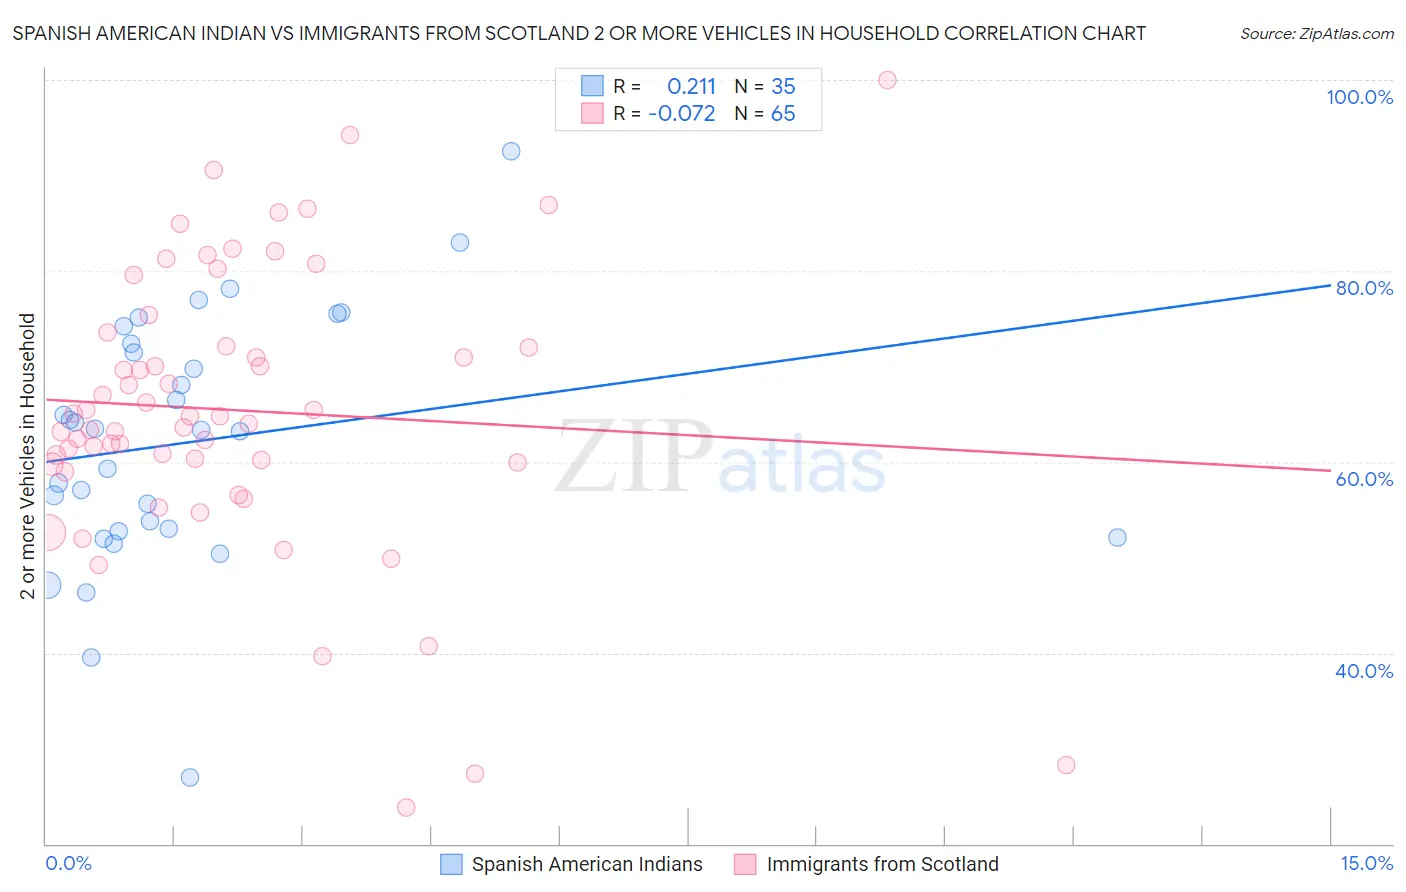 Spanish American Indian vs Immigrants from Scotland 2 or more Vehicles in Household